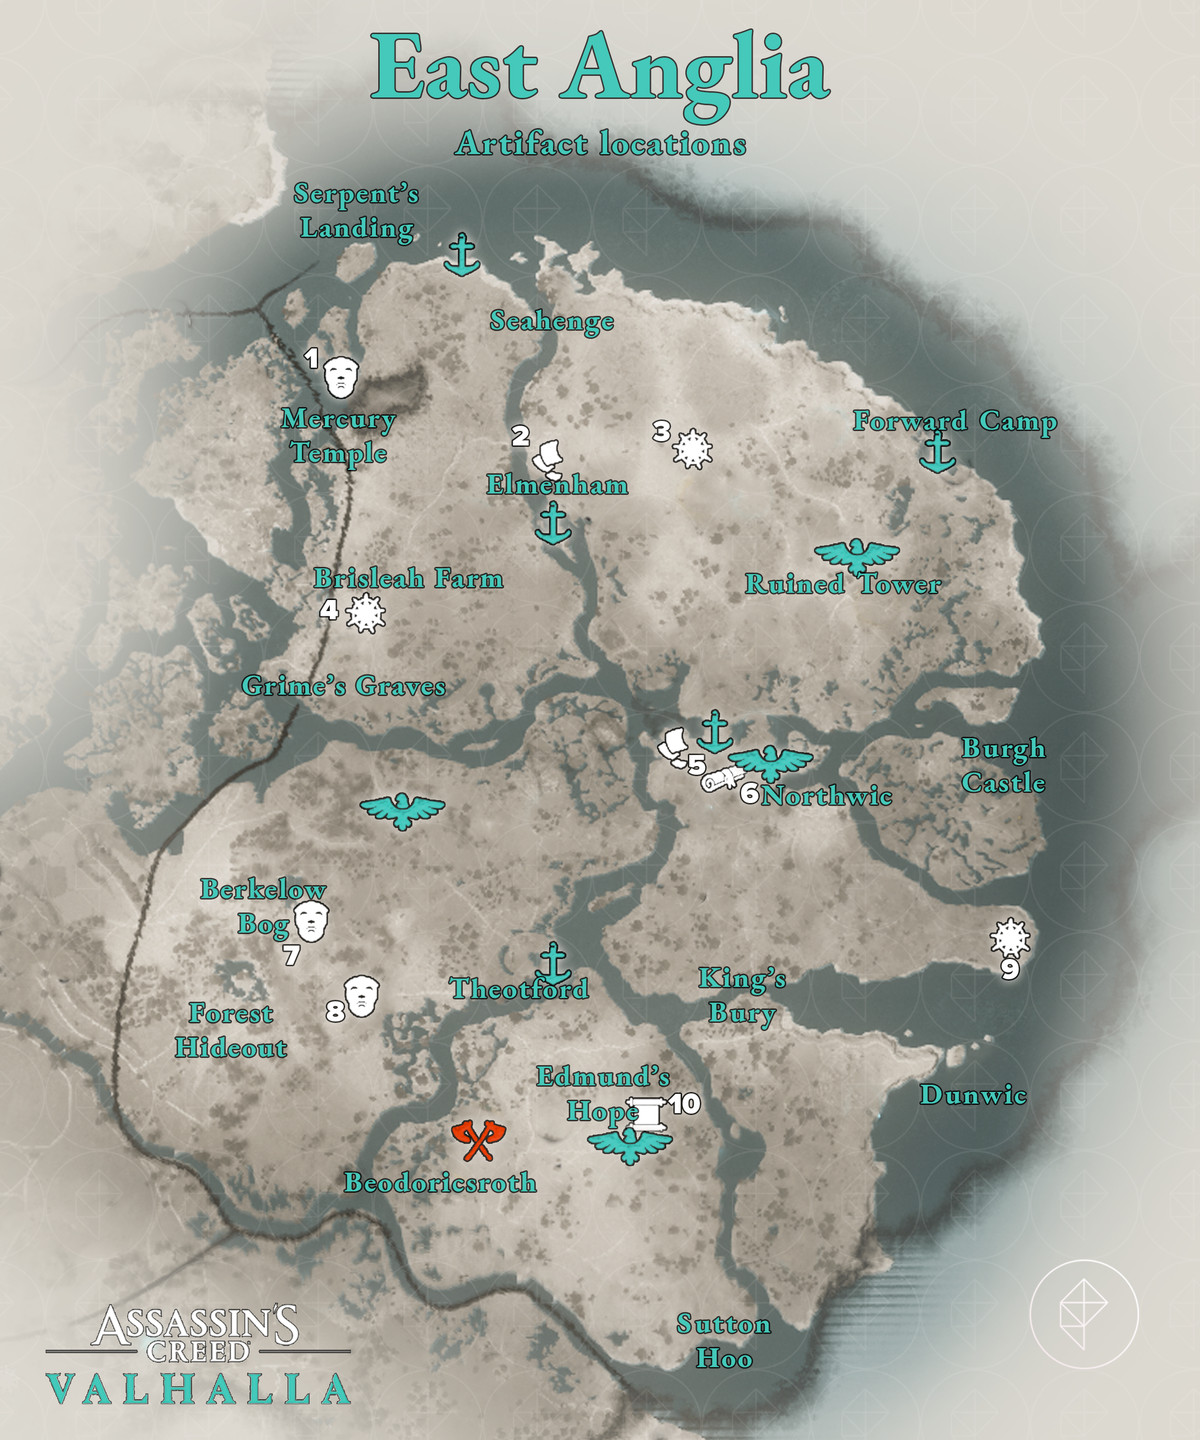 Assassin’s Creed Valhalla East Anglia Artifacts locations map 